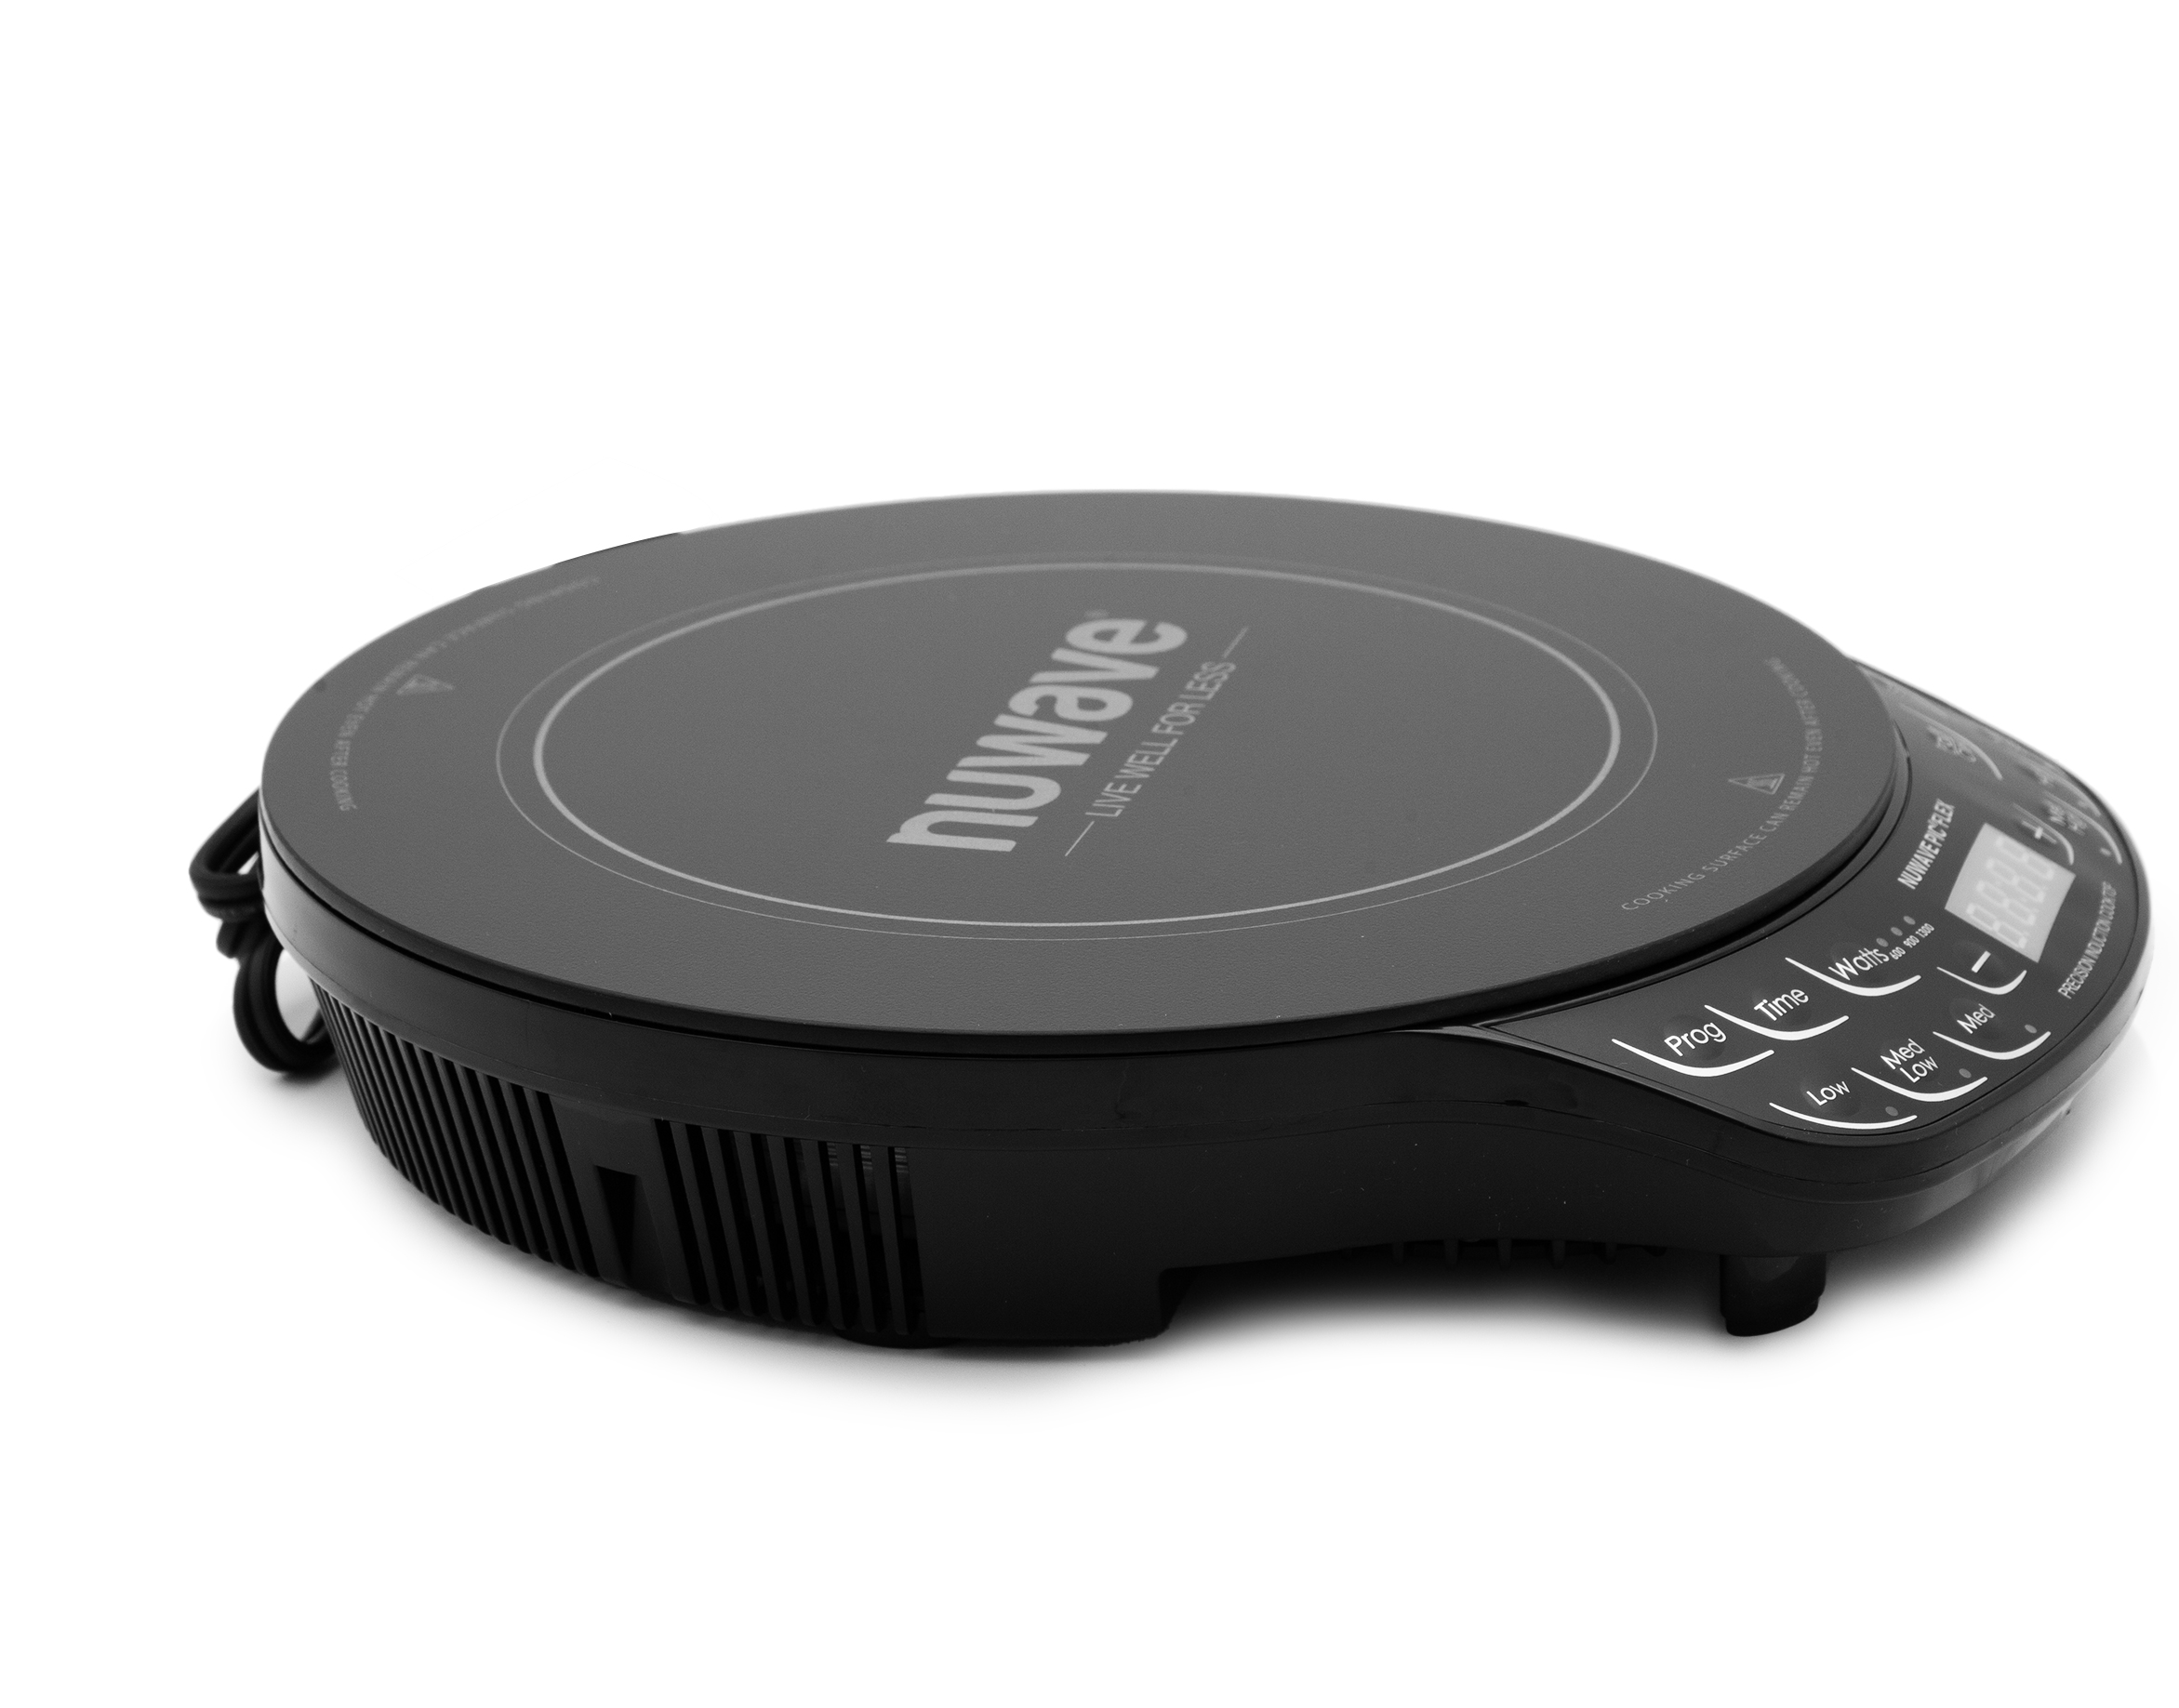 Nuwave 652185000000 NuWave PIC FLEX Induction Cooktop with 9 Non-Stick  Healthy Ceramic Fry Pan Included (PIC Flex + 9 Fry Pan)